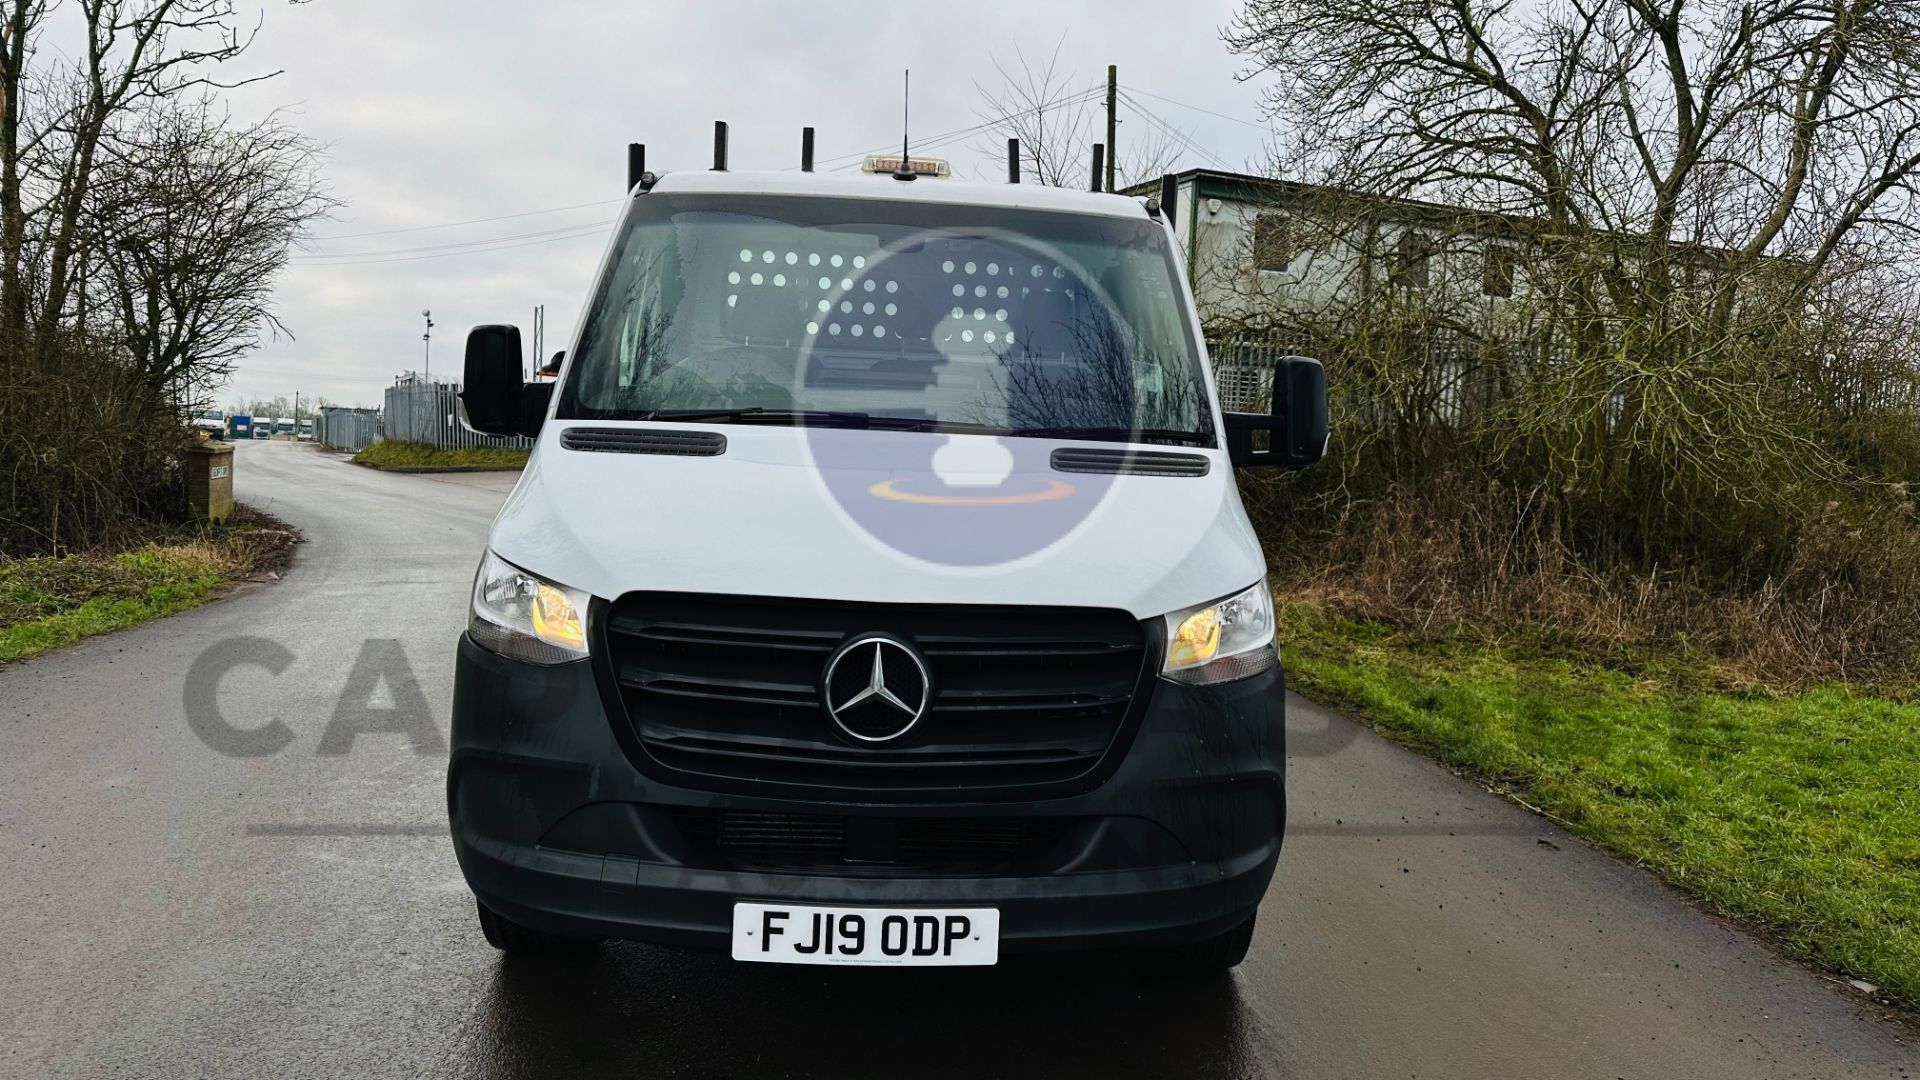 MERCEDES-BENZ SPRINTER 314 CDI *LWB - DROPSIDE* (2019 - EURO 6) AUTOMATIC *TAIL-LIFT* (3500 KG) - Image 4 of 40